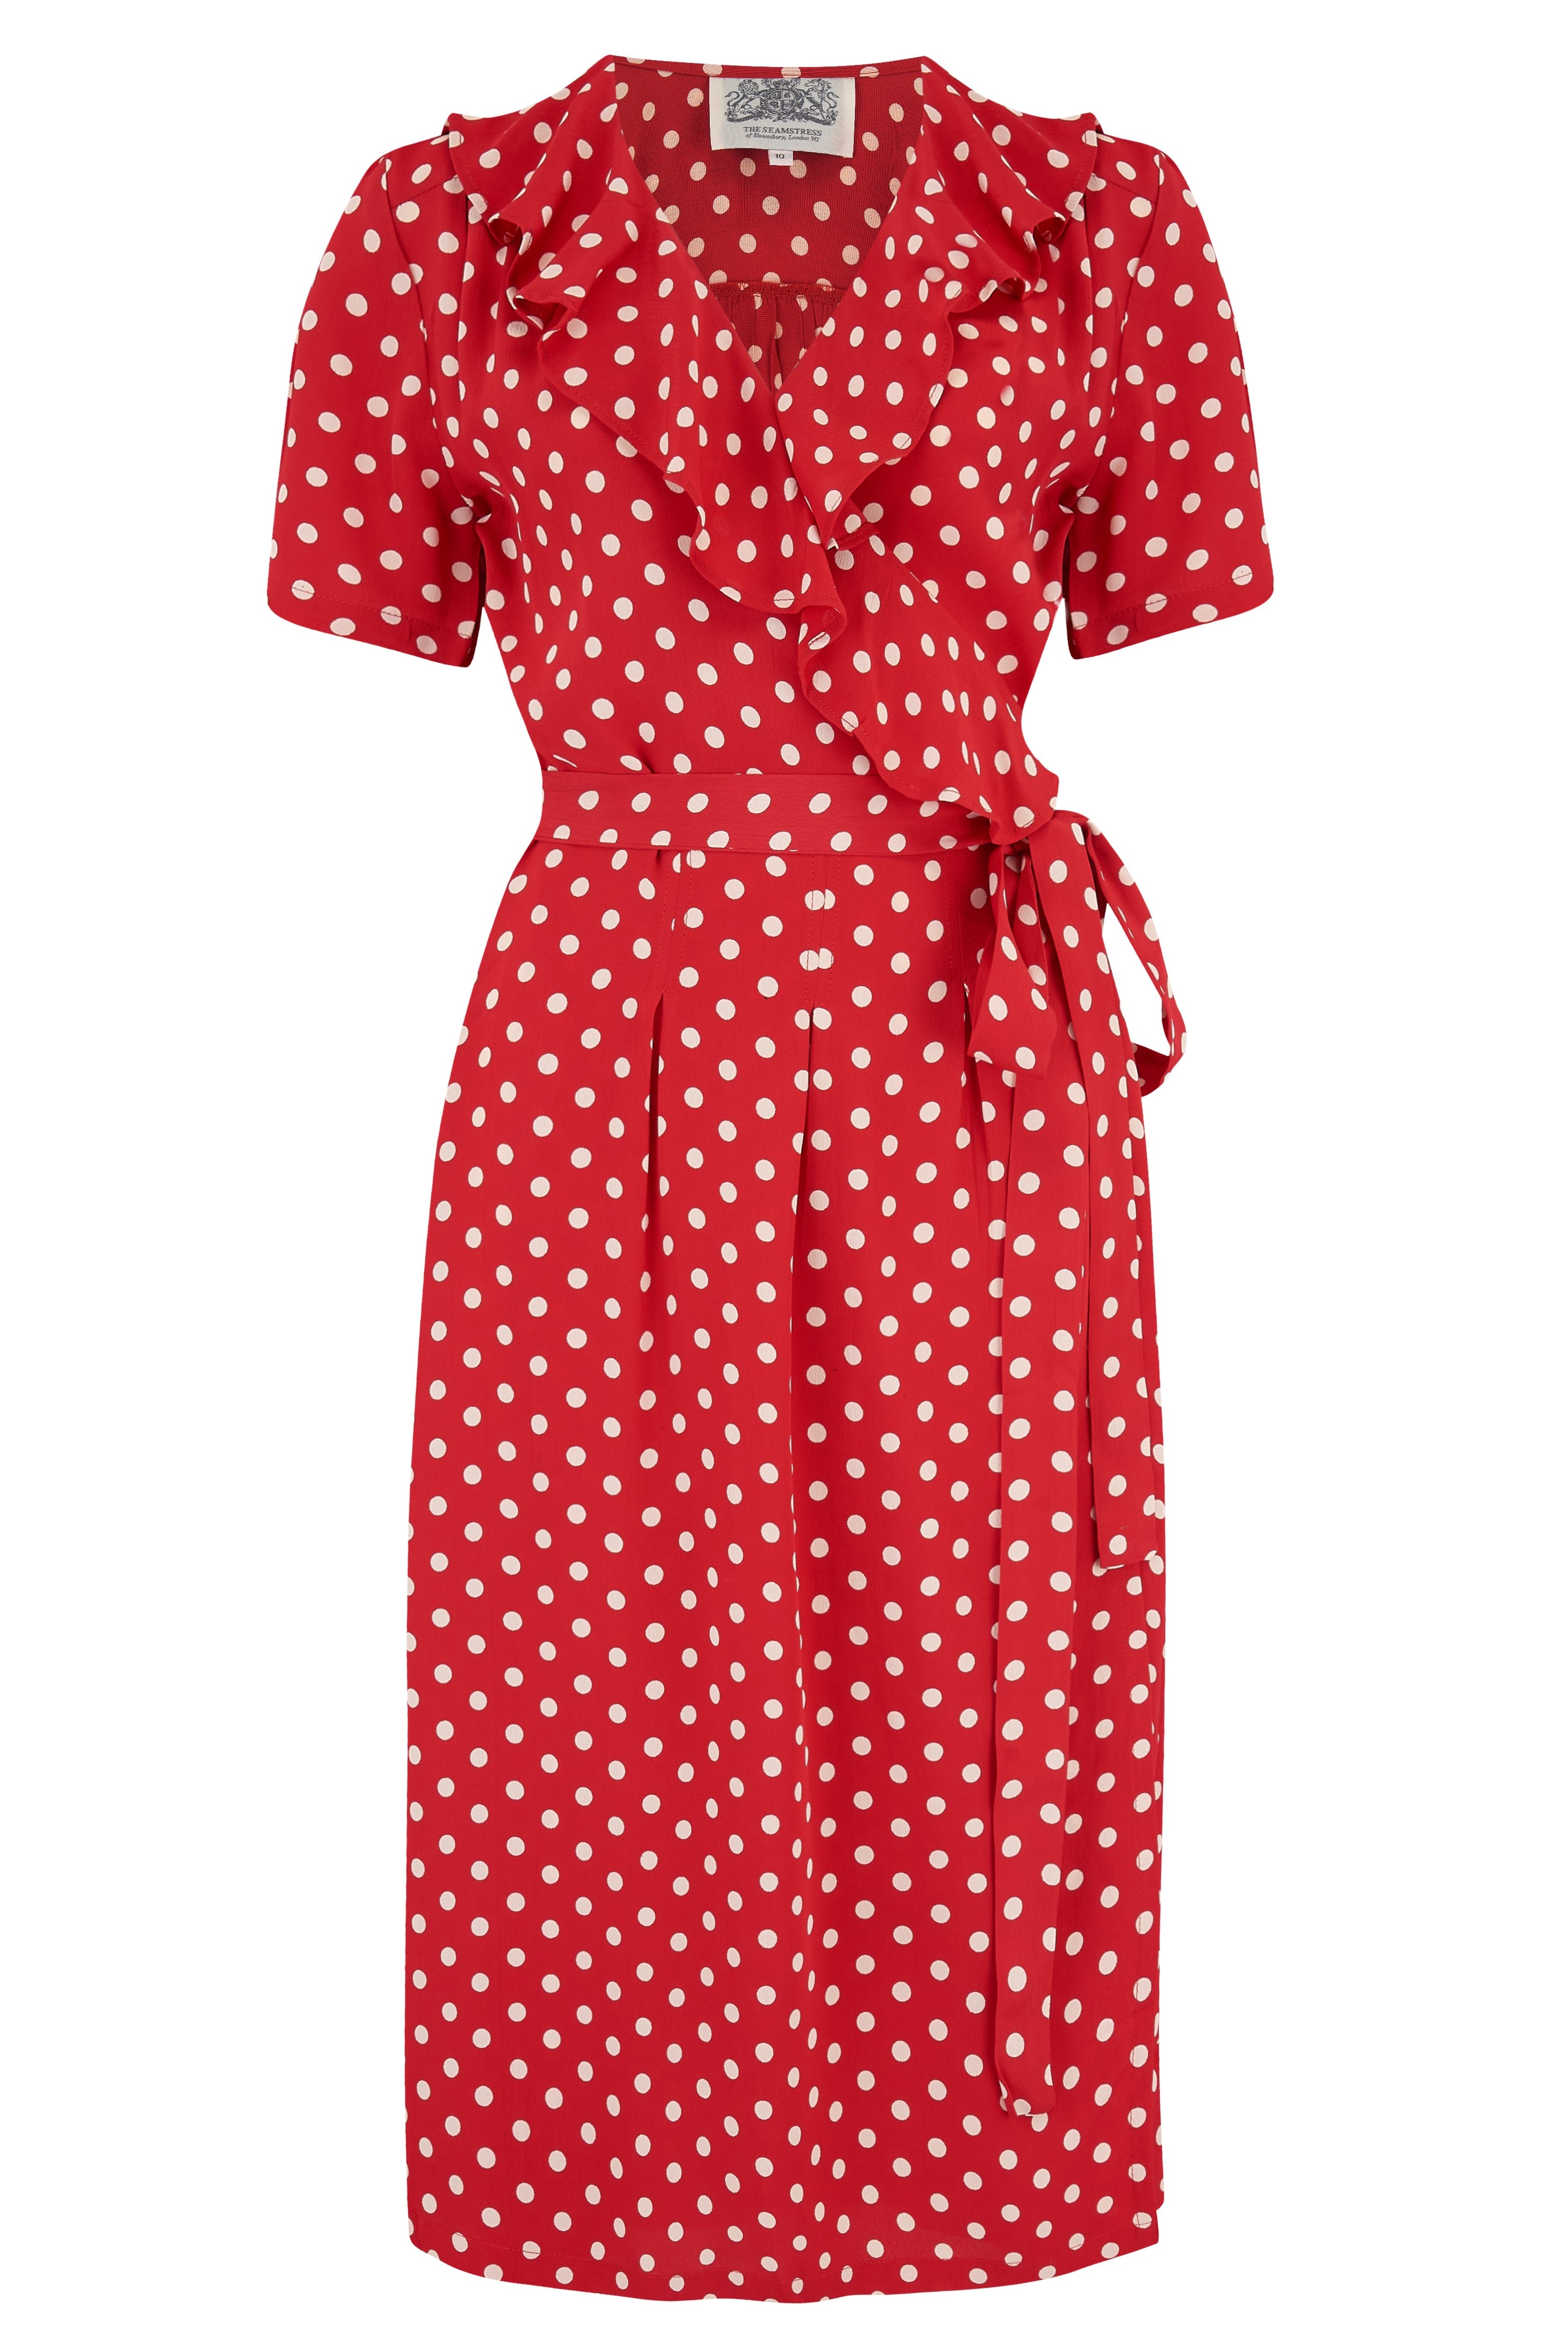 Red and White Polka Dot